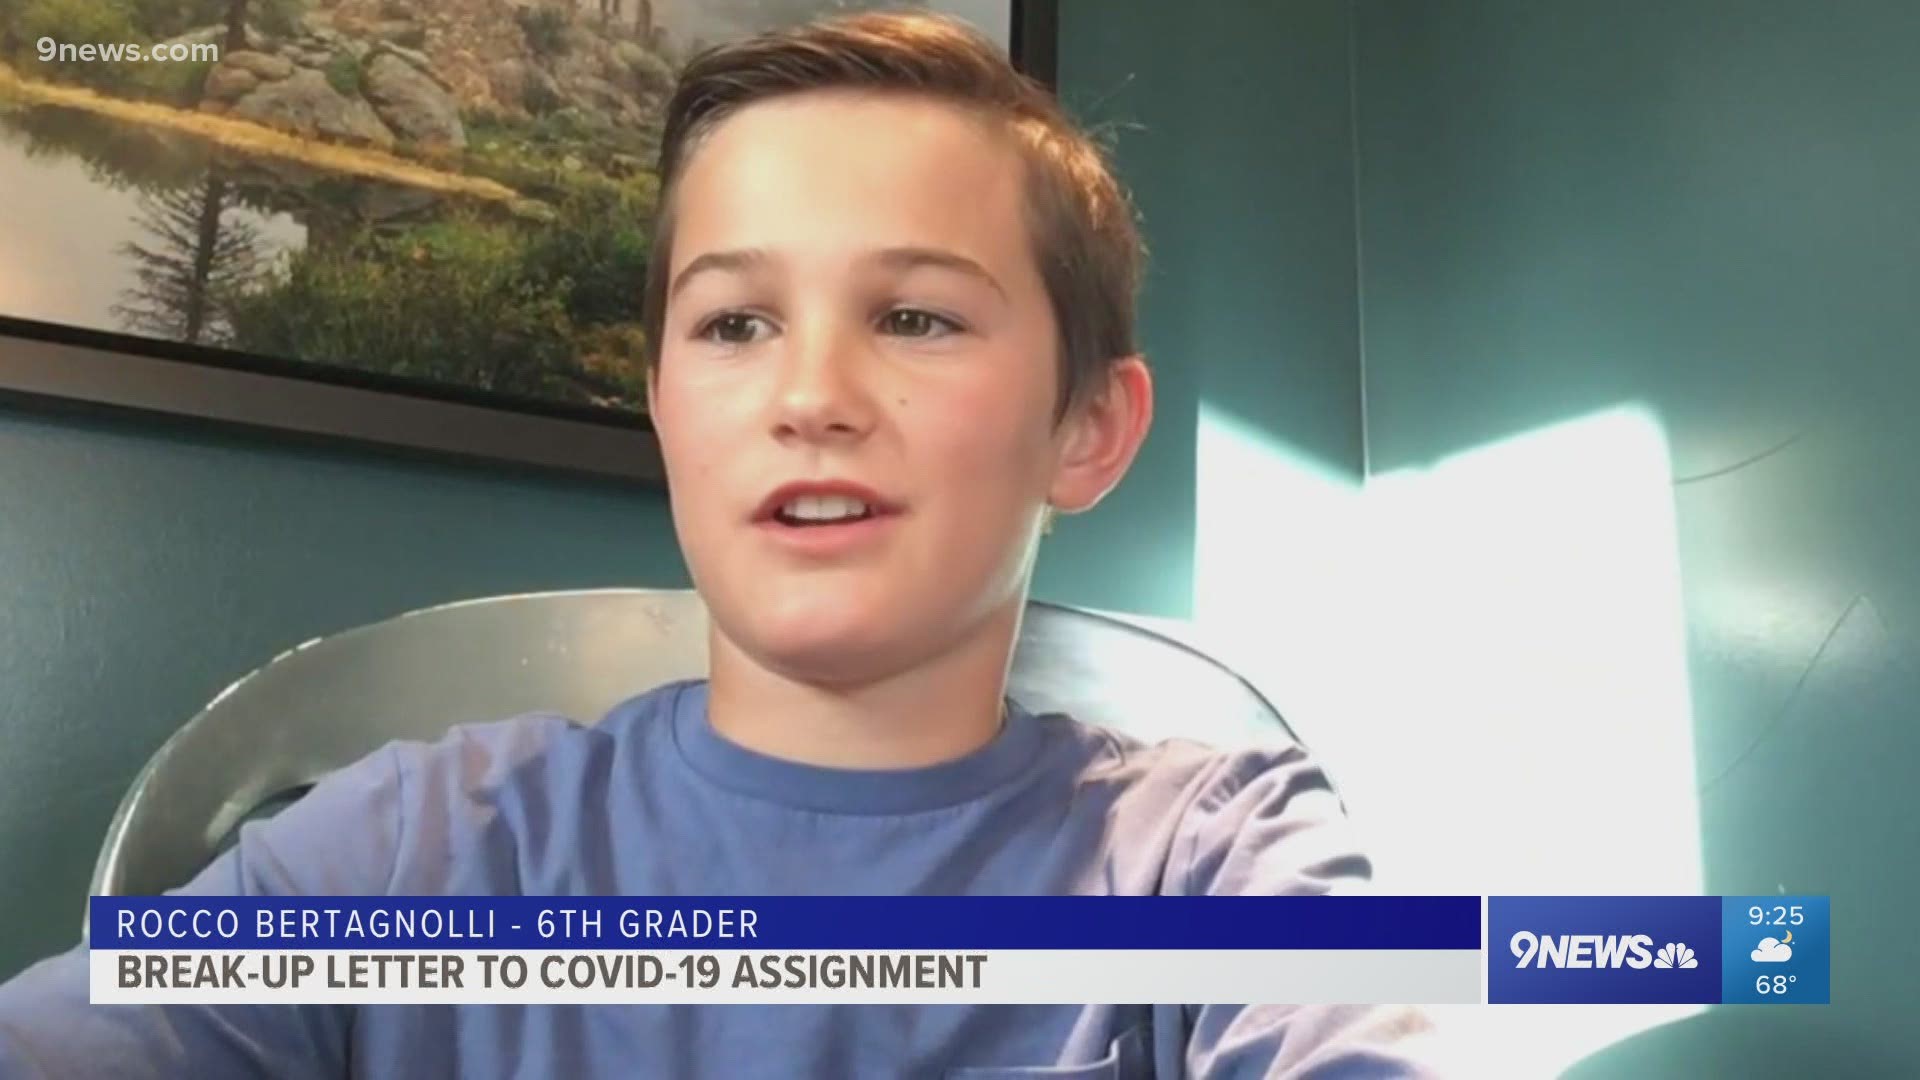 Rocco, a student at Sacred Heart of Jesus School in Boulder, says his teacher told the class to write a break-up letter to COVID-19.